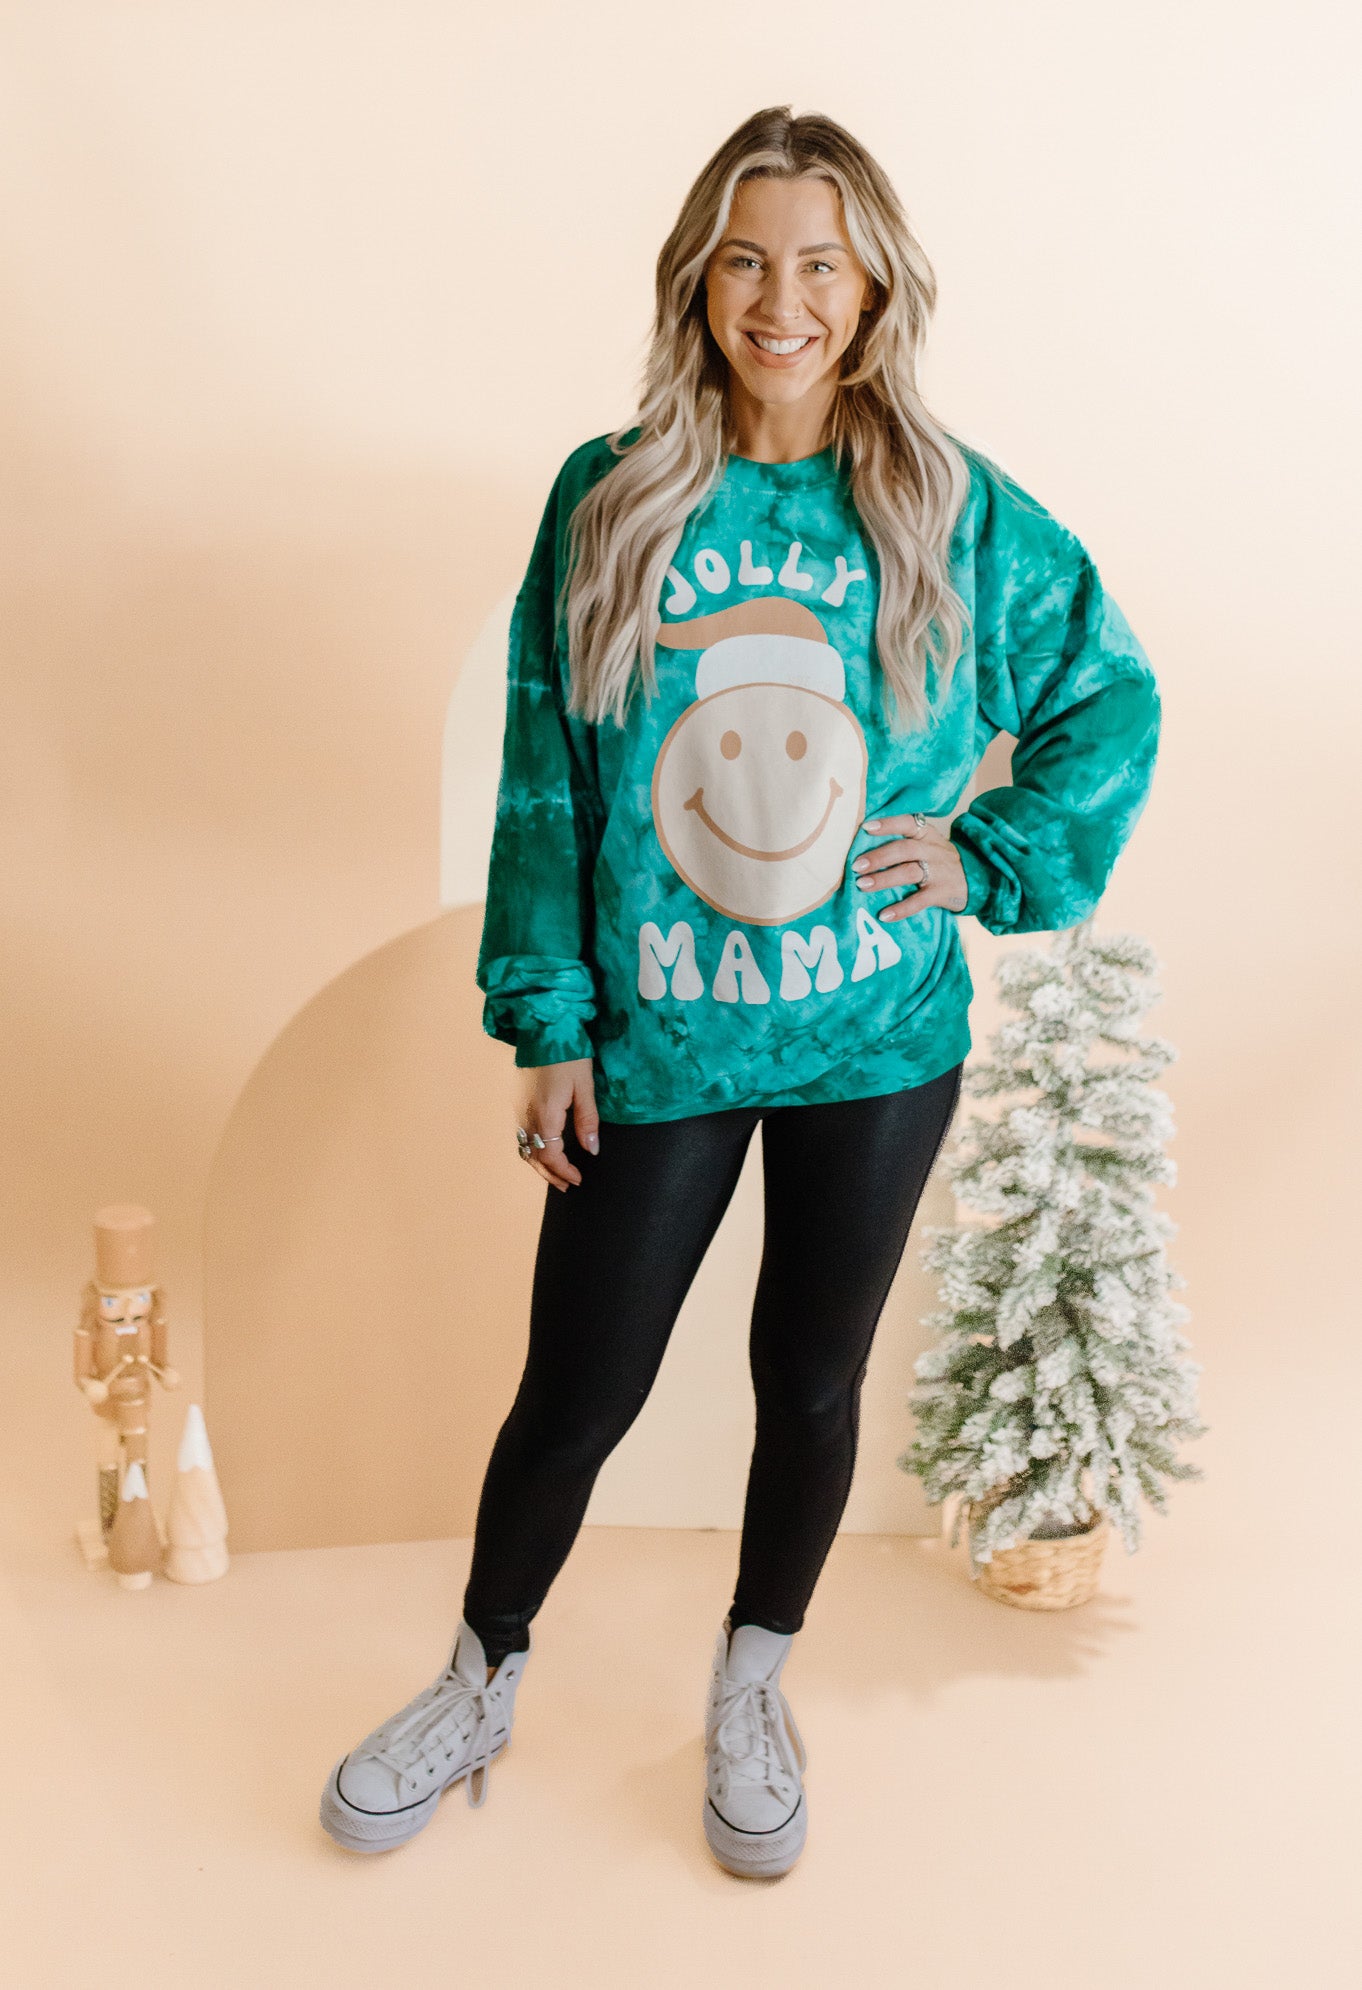 Jolly Mama ☺ Holiday Tie-Dye Pullover